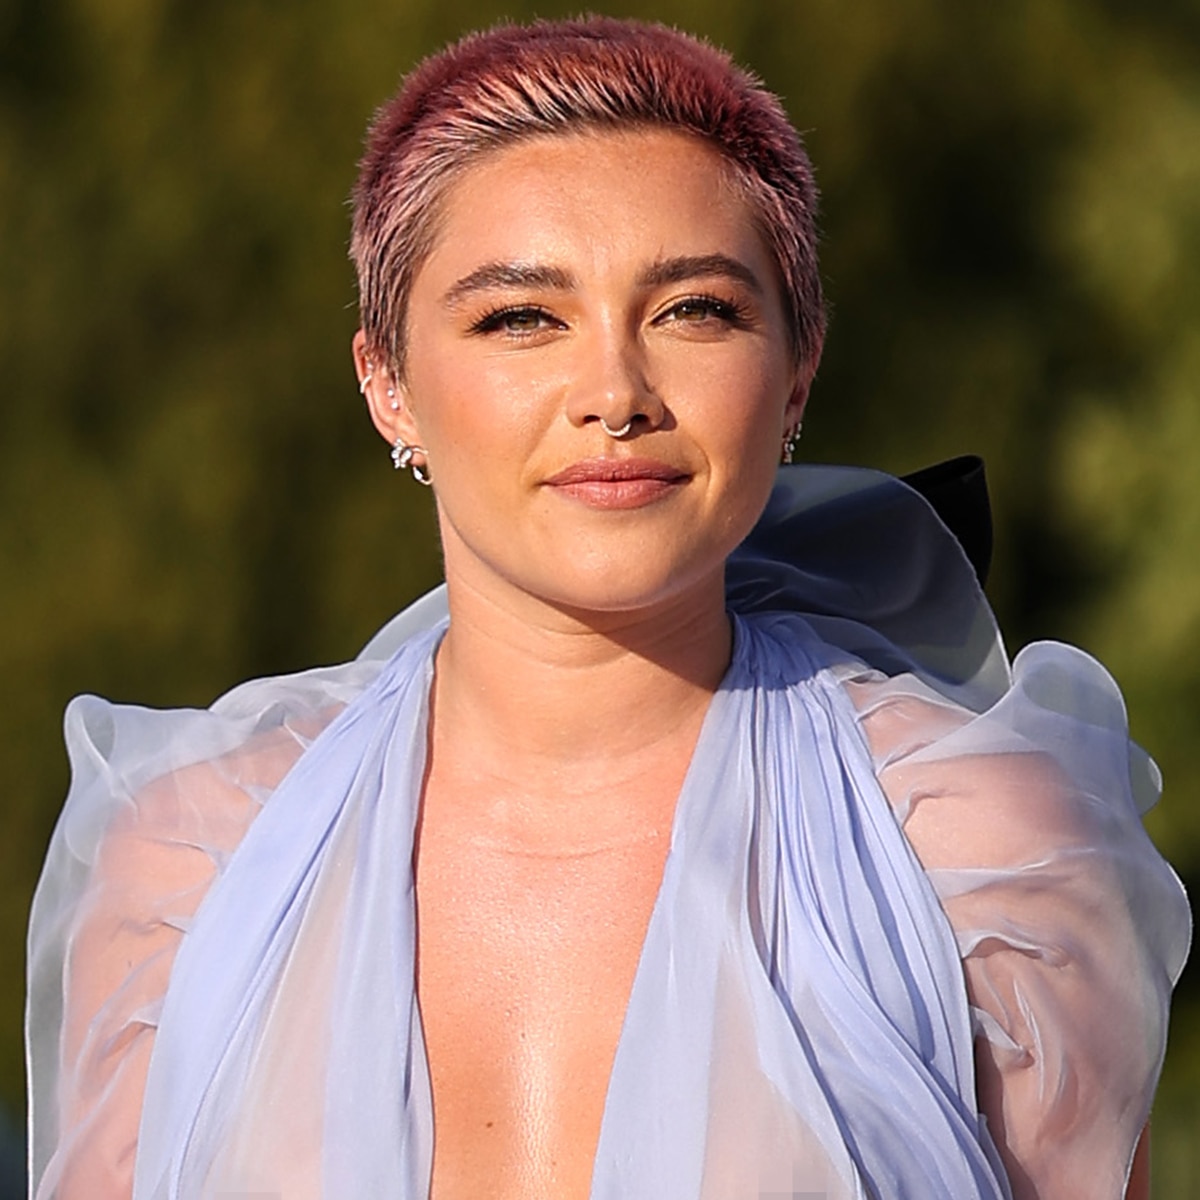 Florence Pugh S Completely Sheer Gown Will Inspire You To Free The Nipple E Online ReportWire